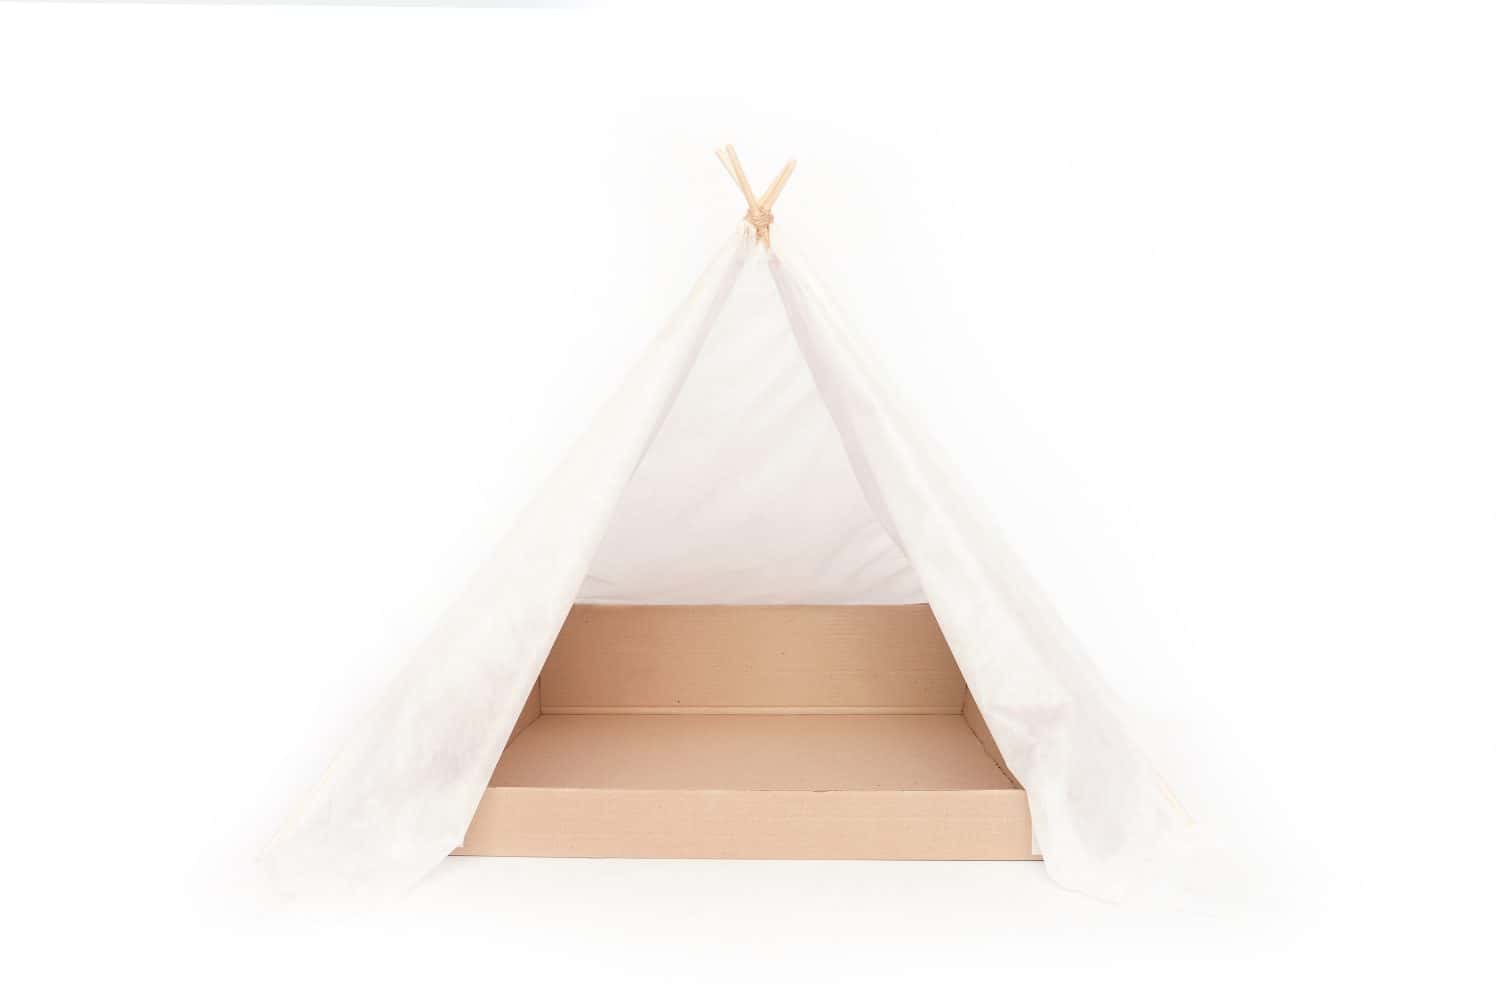 Homemade hut with a box. Teepee for a cat with a paper box on a white background is isolated.